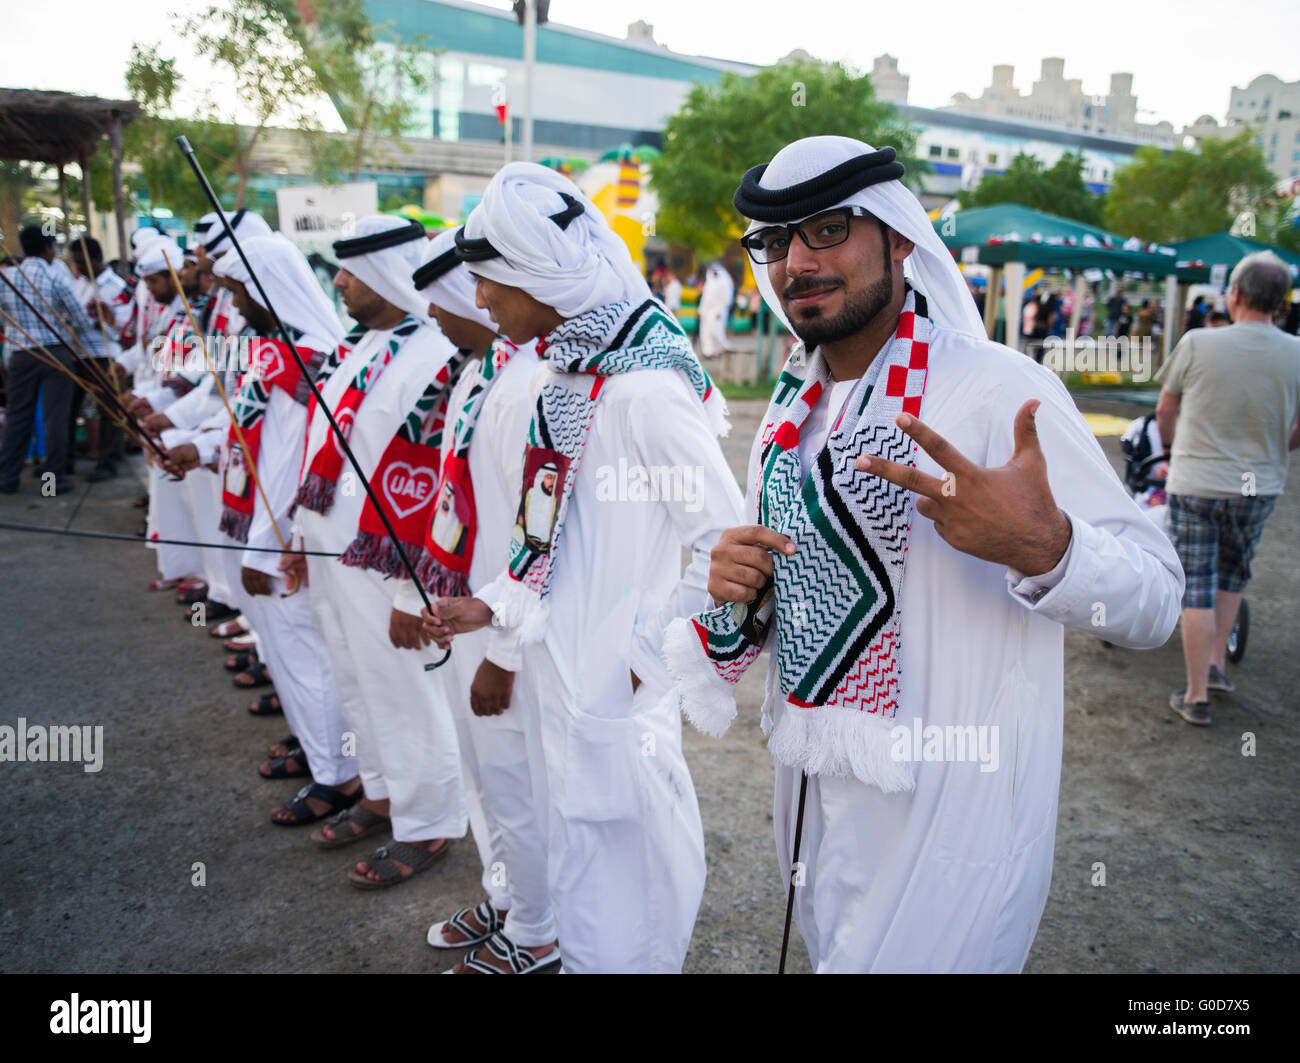 Dubai, - November 28, 2013: emirates men in traditional dress celebrate the 4th year of the foundation of the UAE state Stock Photo